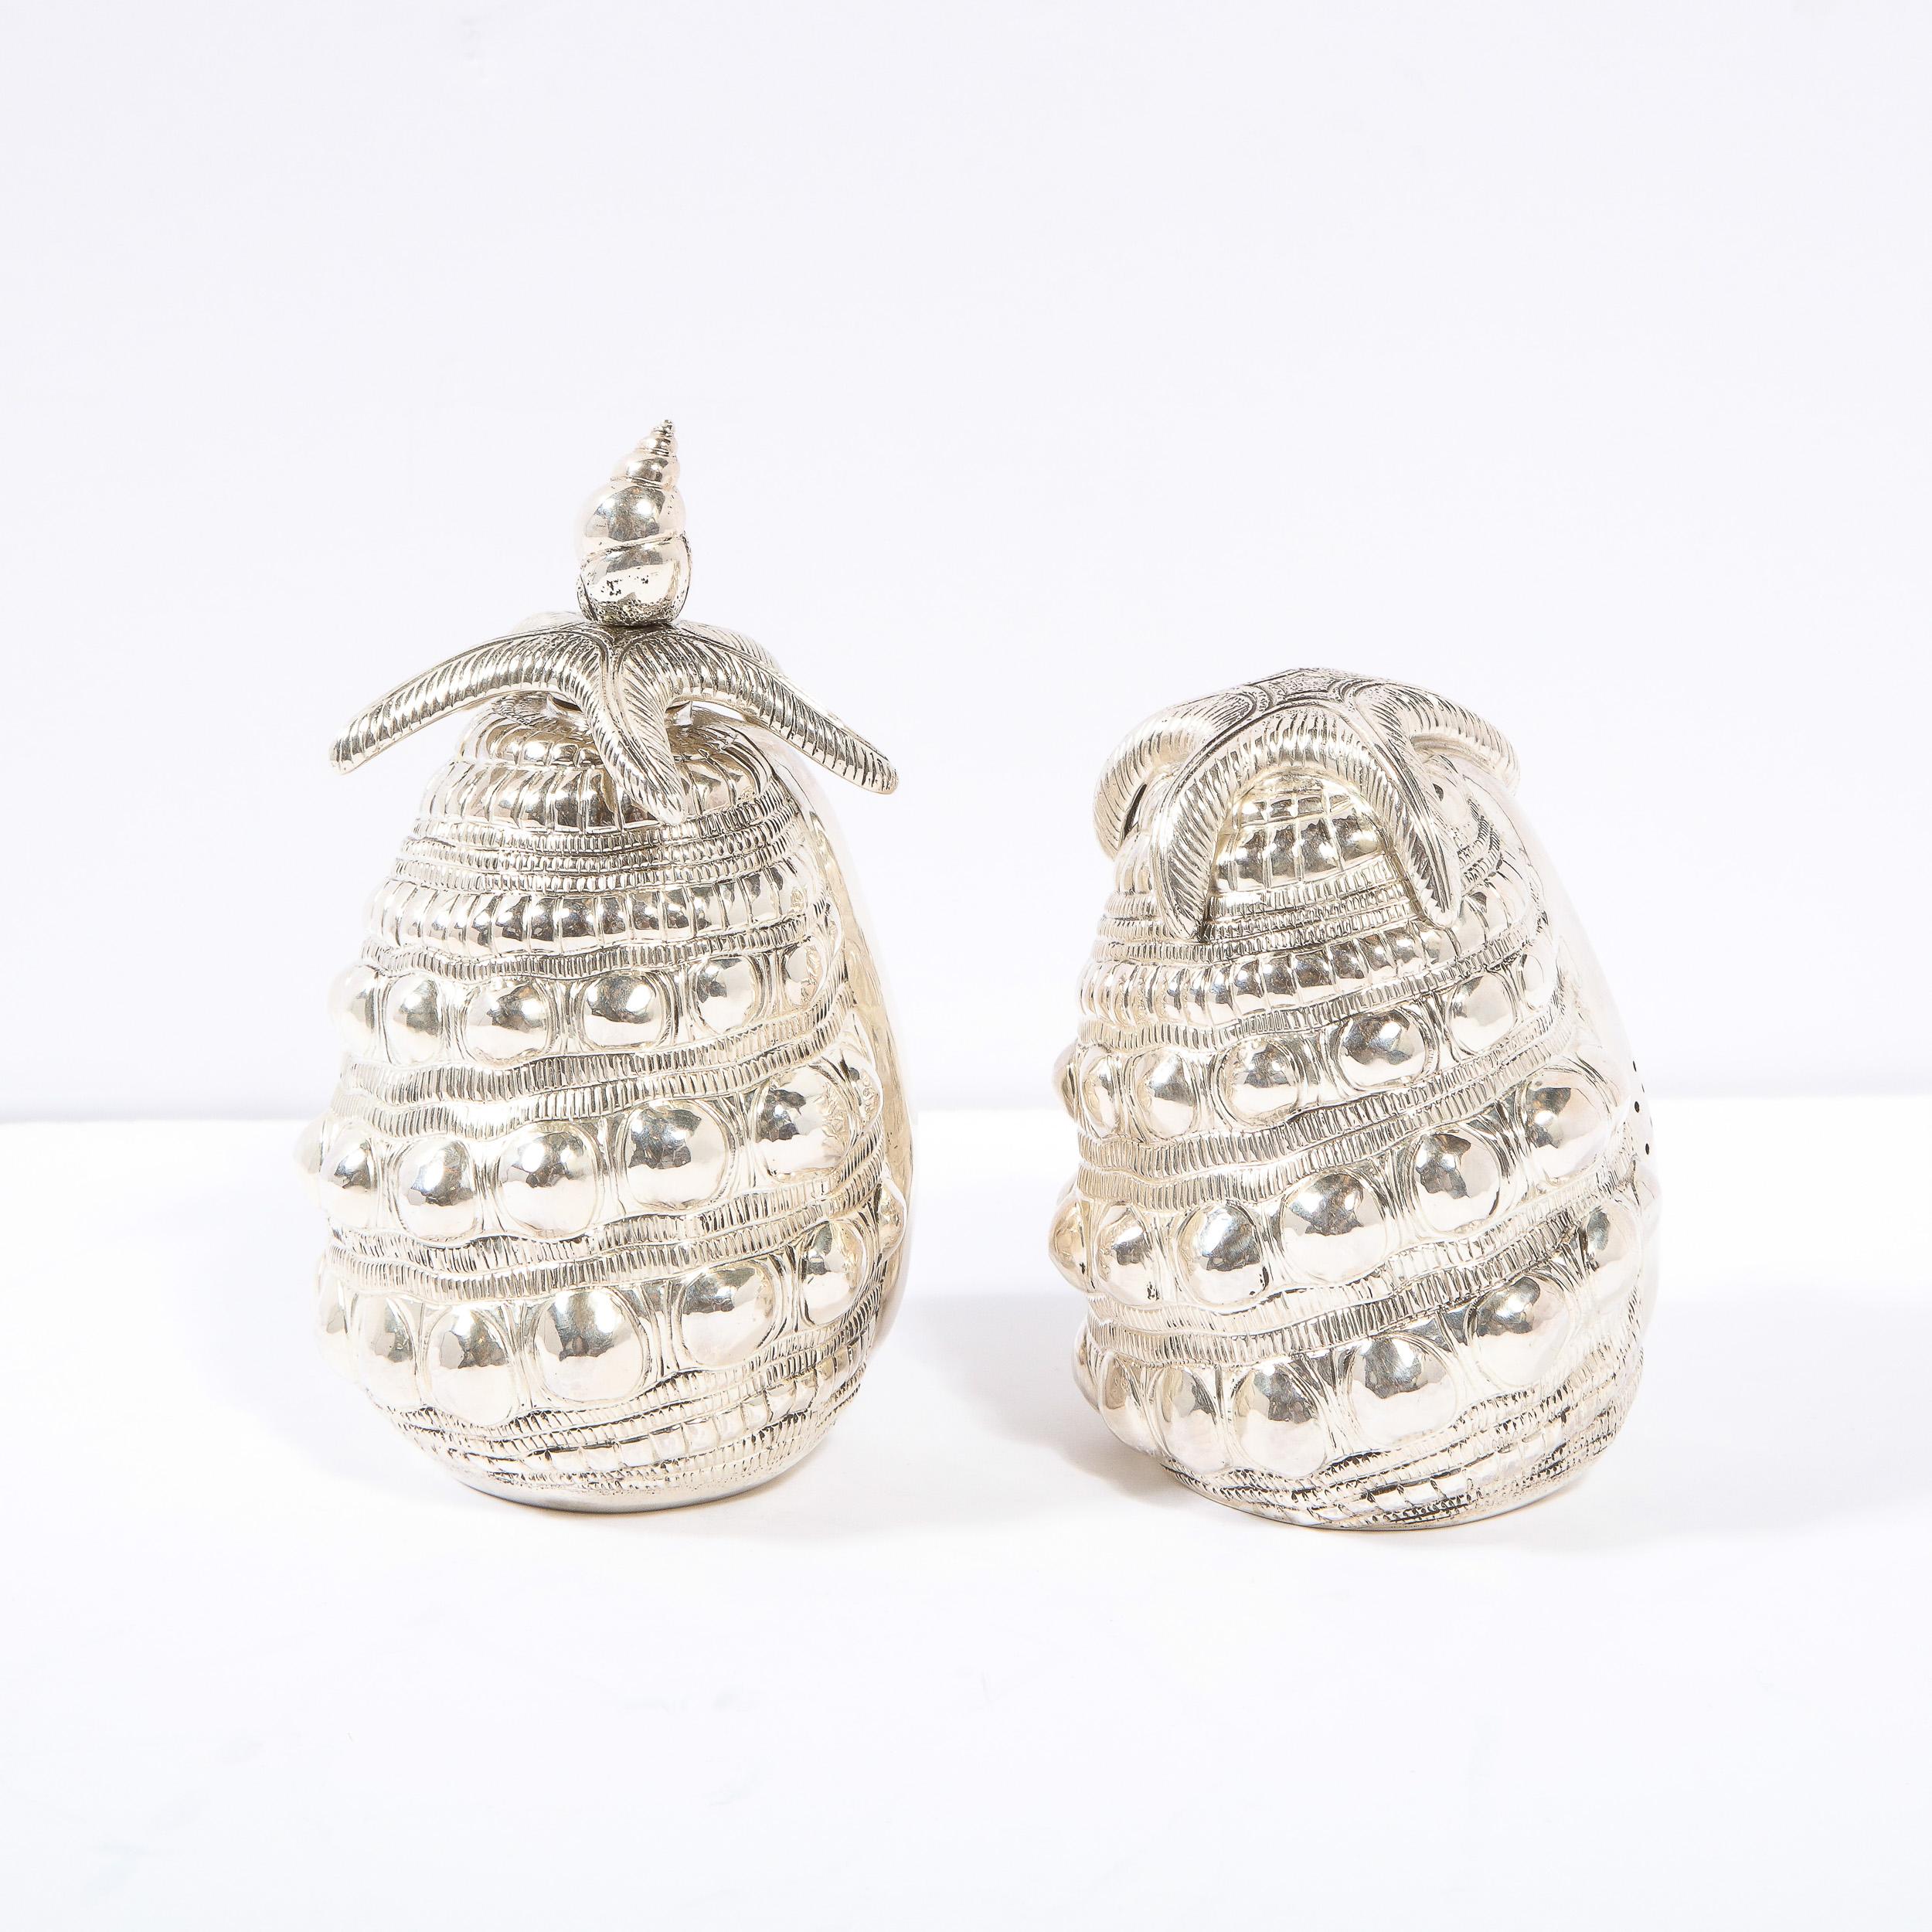 Modern Handcrafted Sterling Silver Seashell Salt Shaker & Pepper Mill Signed Missiaglia For Sale